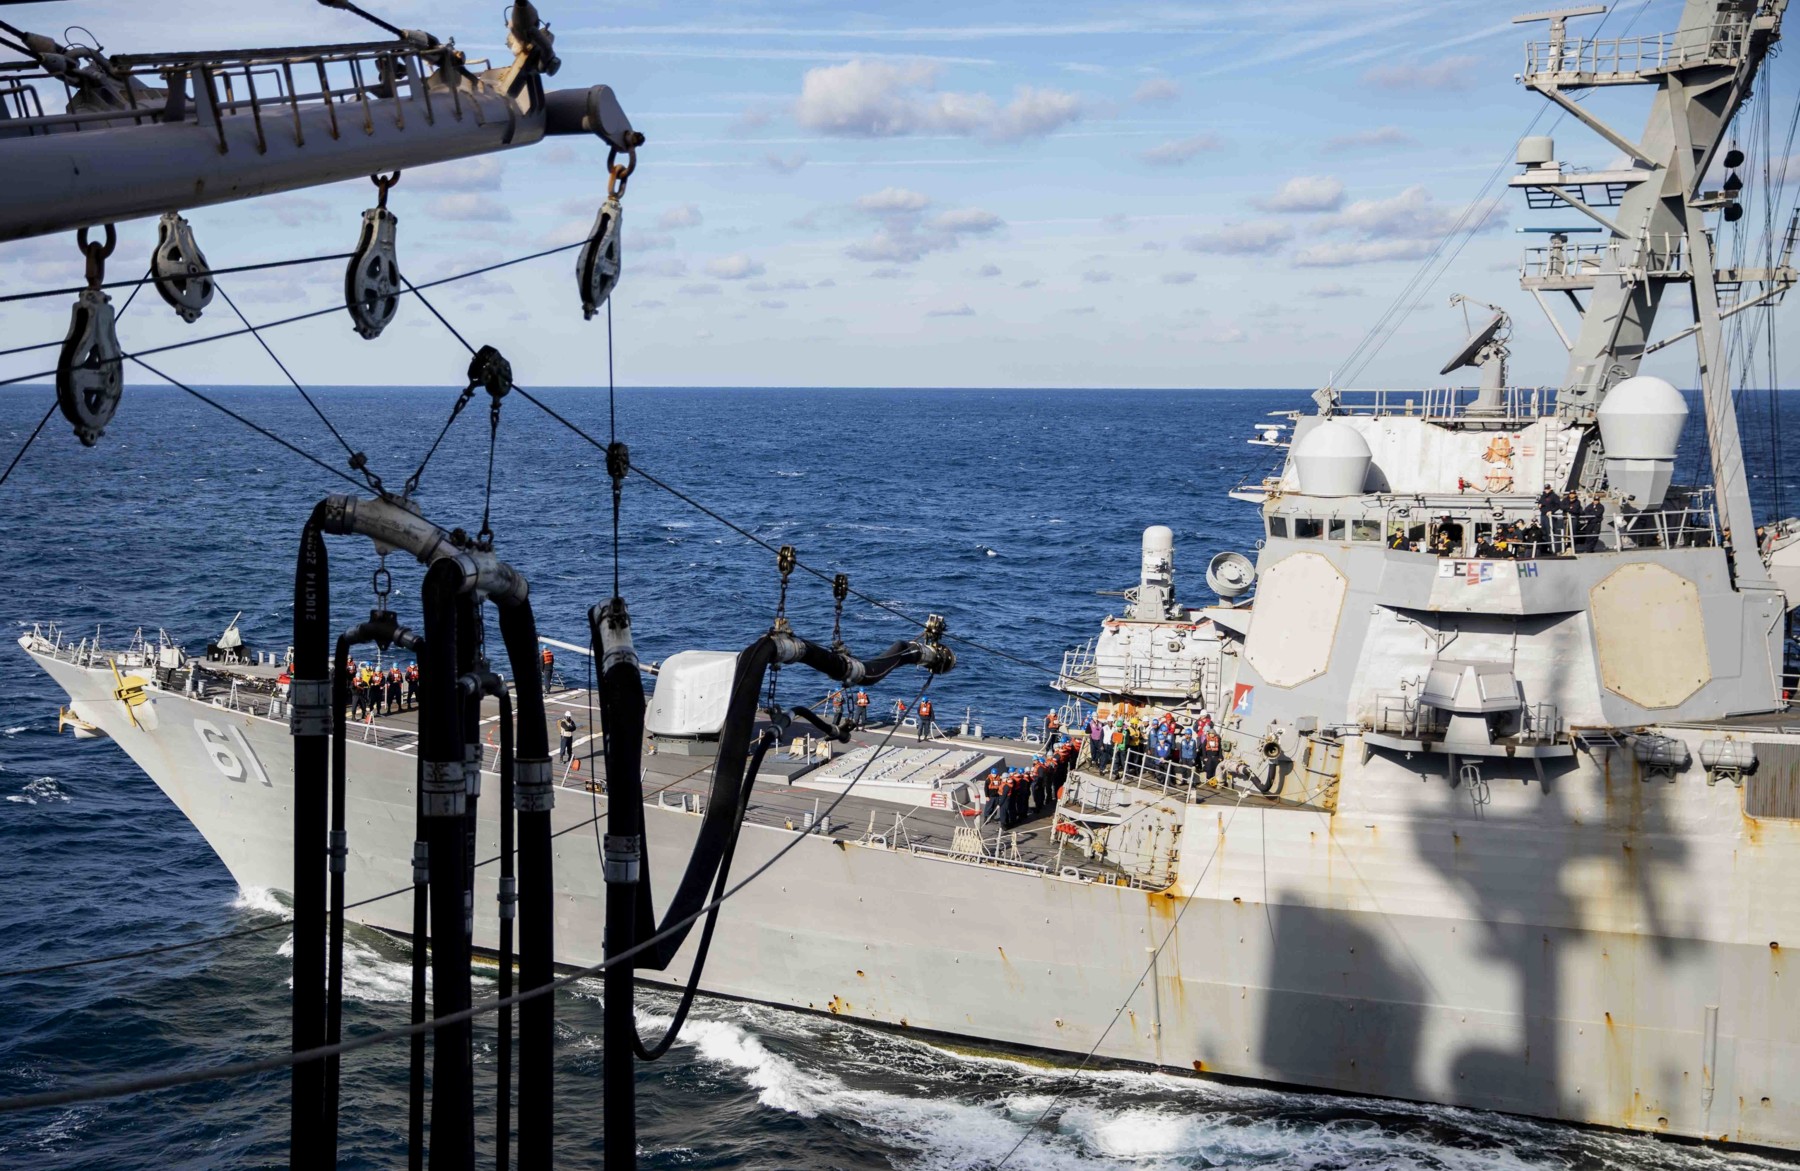 ddg-61 uss ramage guided missile destroyer arleigh burke class aegis us navy replenishment ras 99